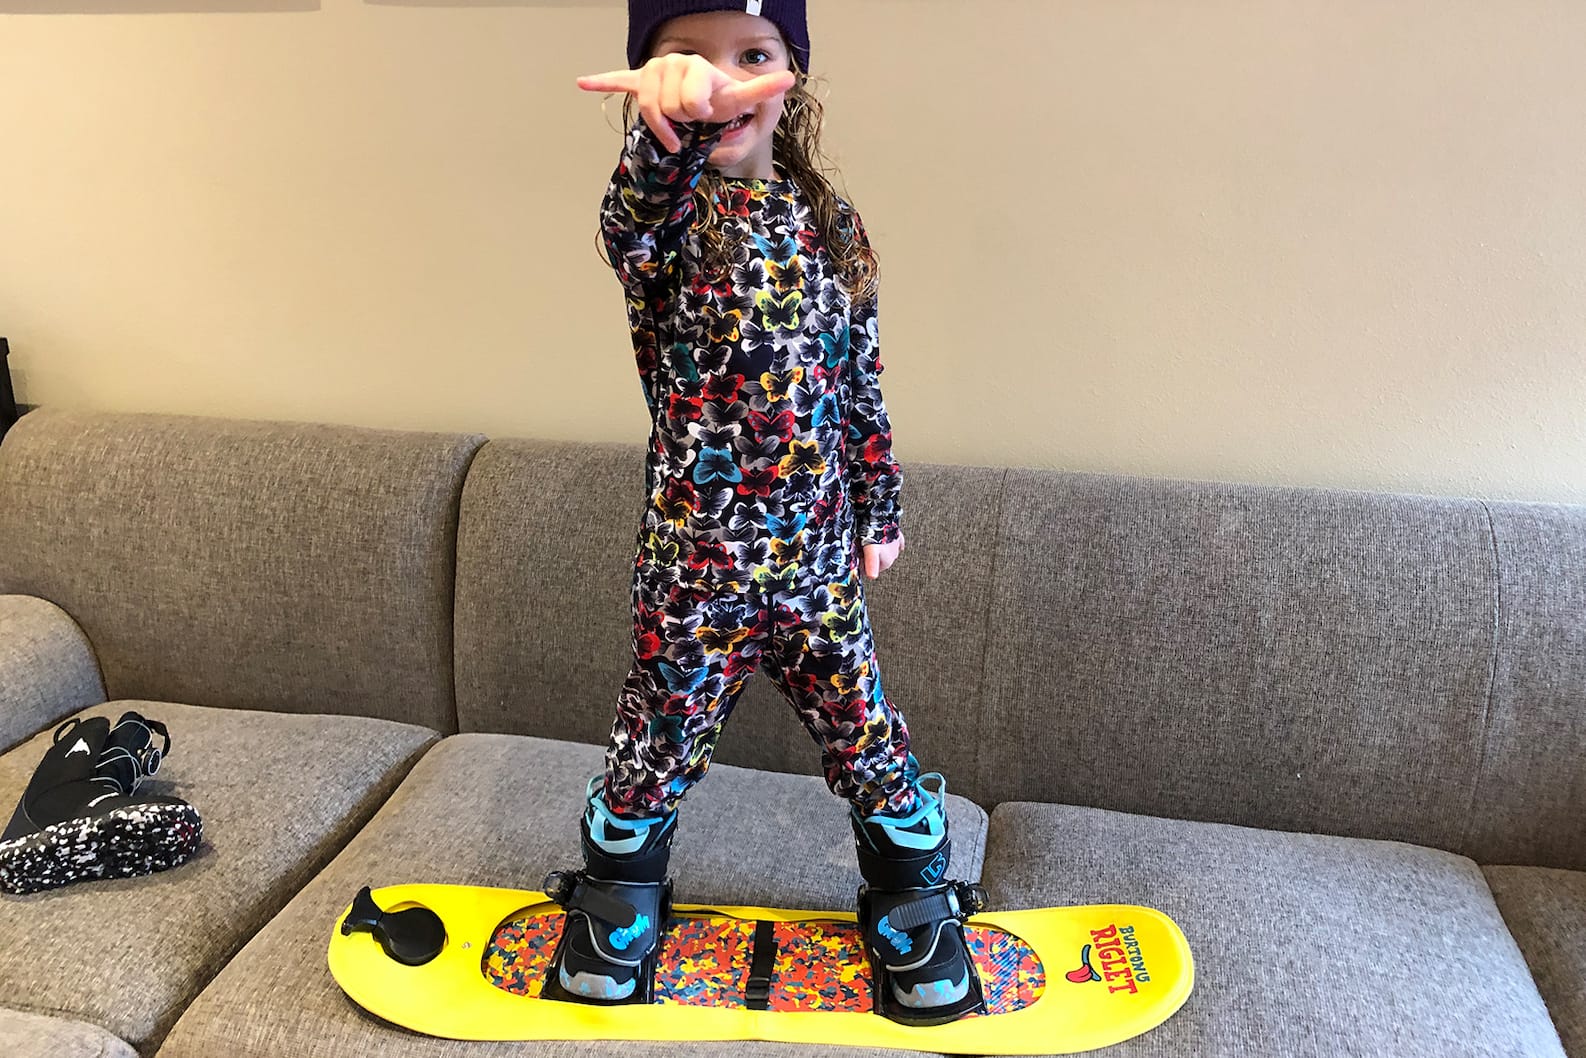 How to Make an Indoor Riglet Park for Kids | Burton Snowboards